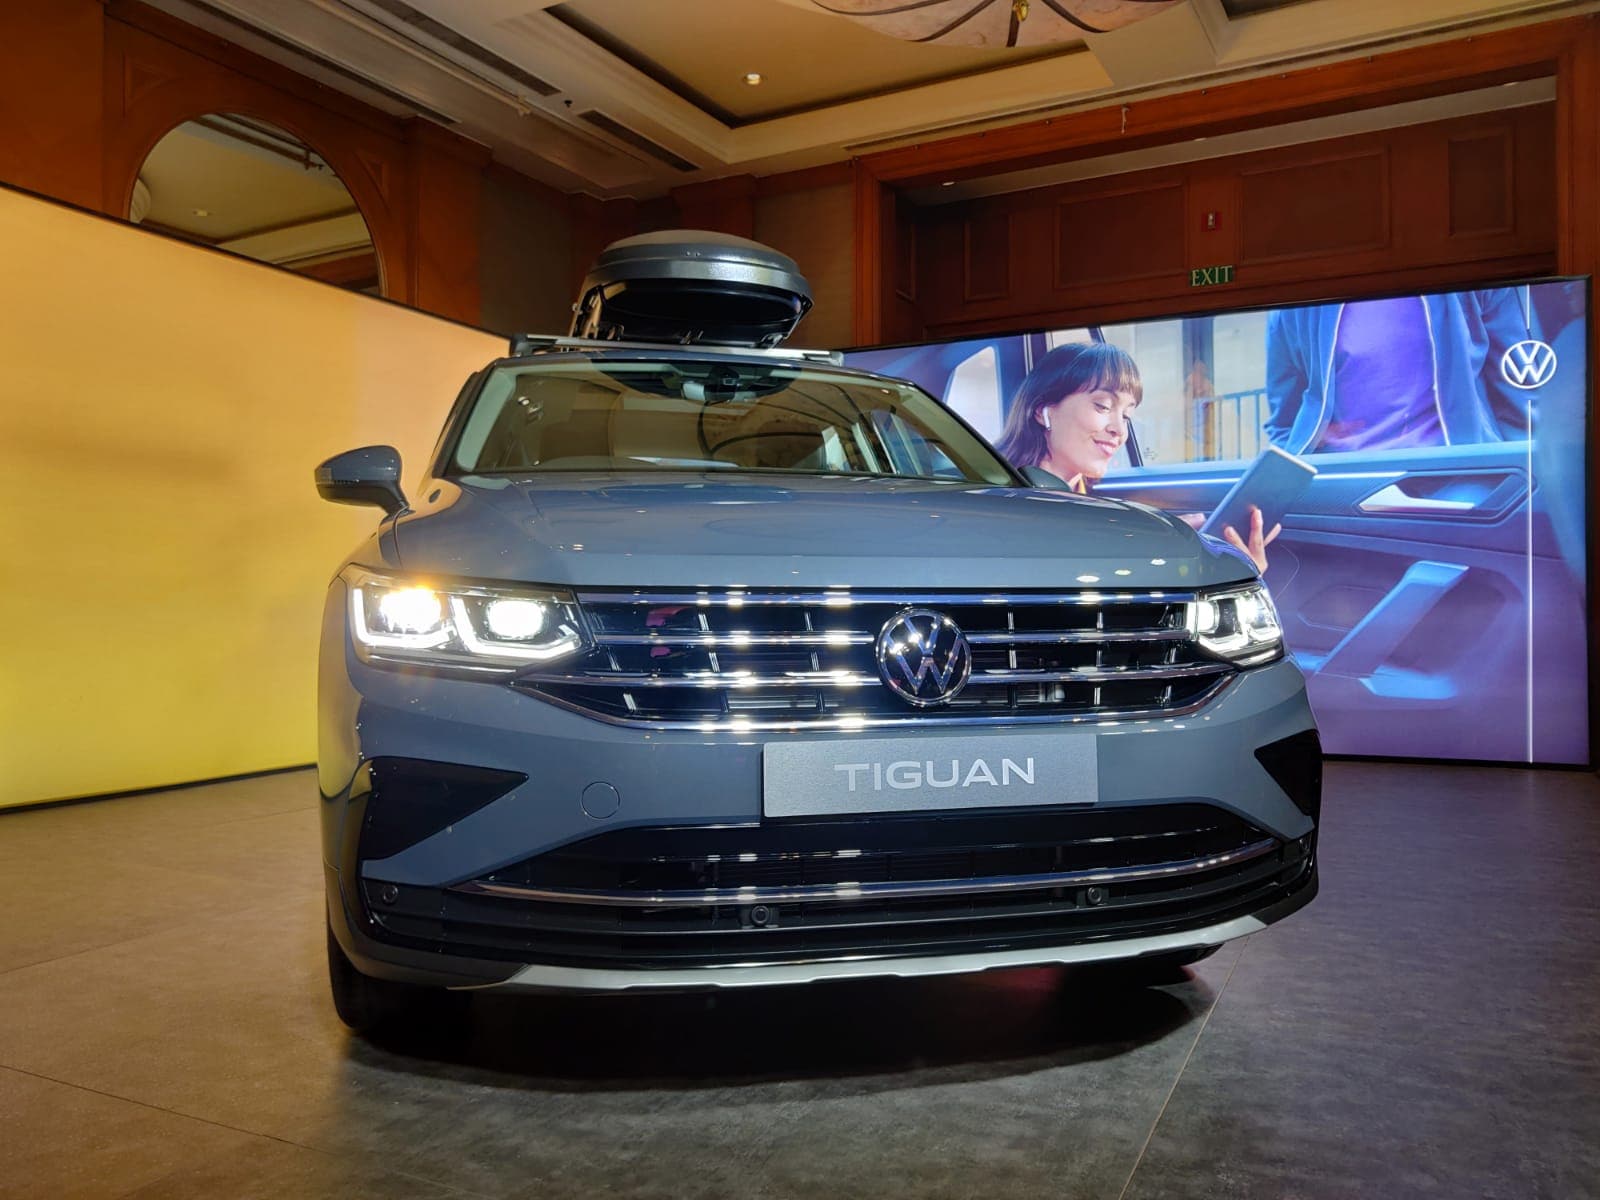 A wider grille and sharper LED head light units adorn the face of the new Tiguan from Volkswagen.